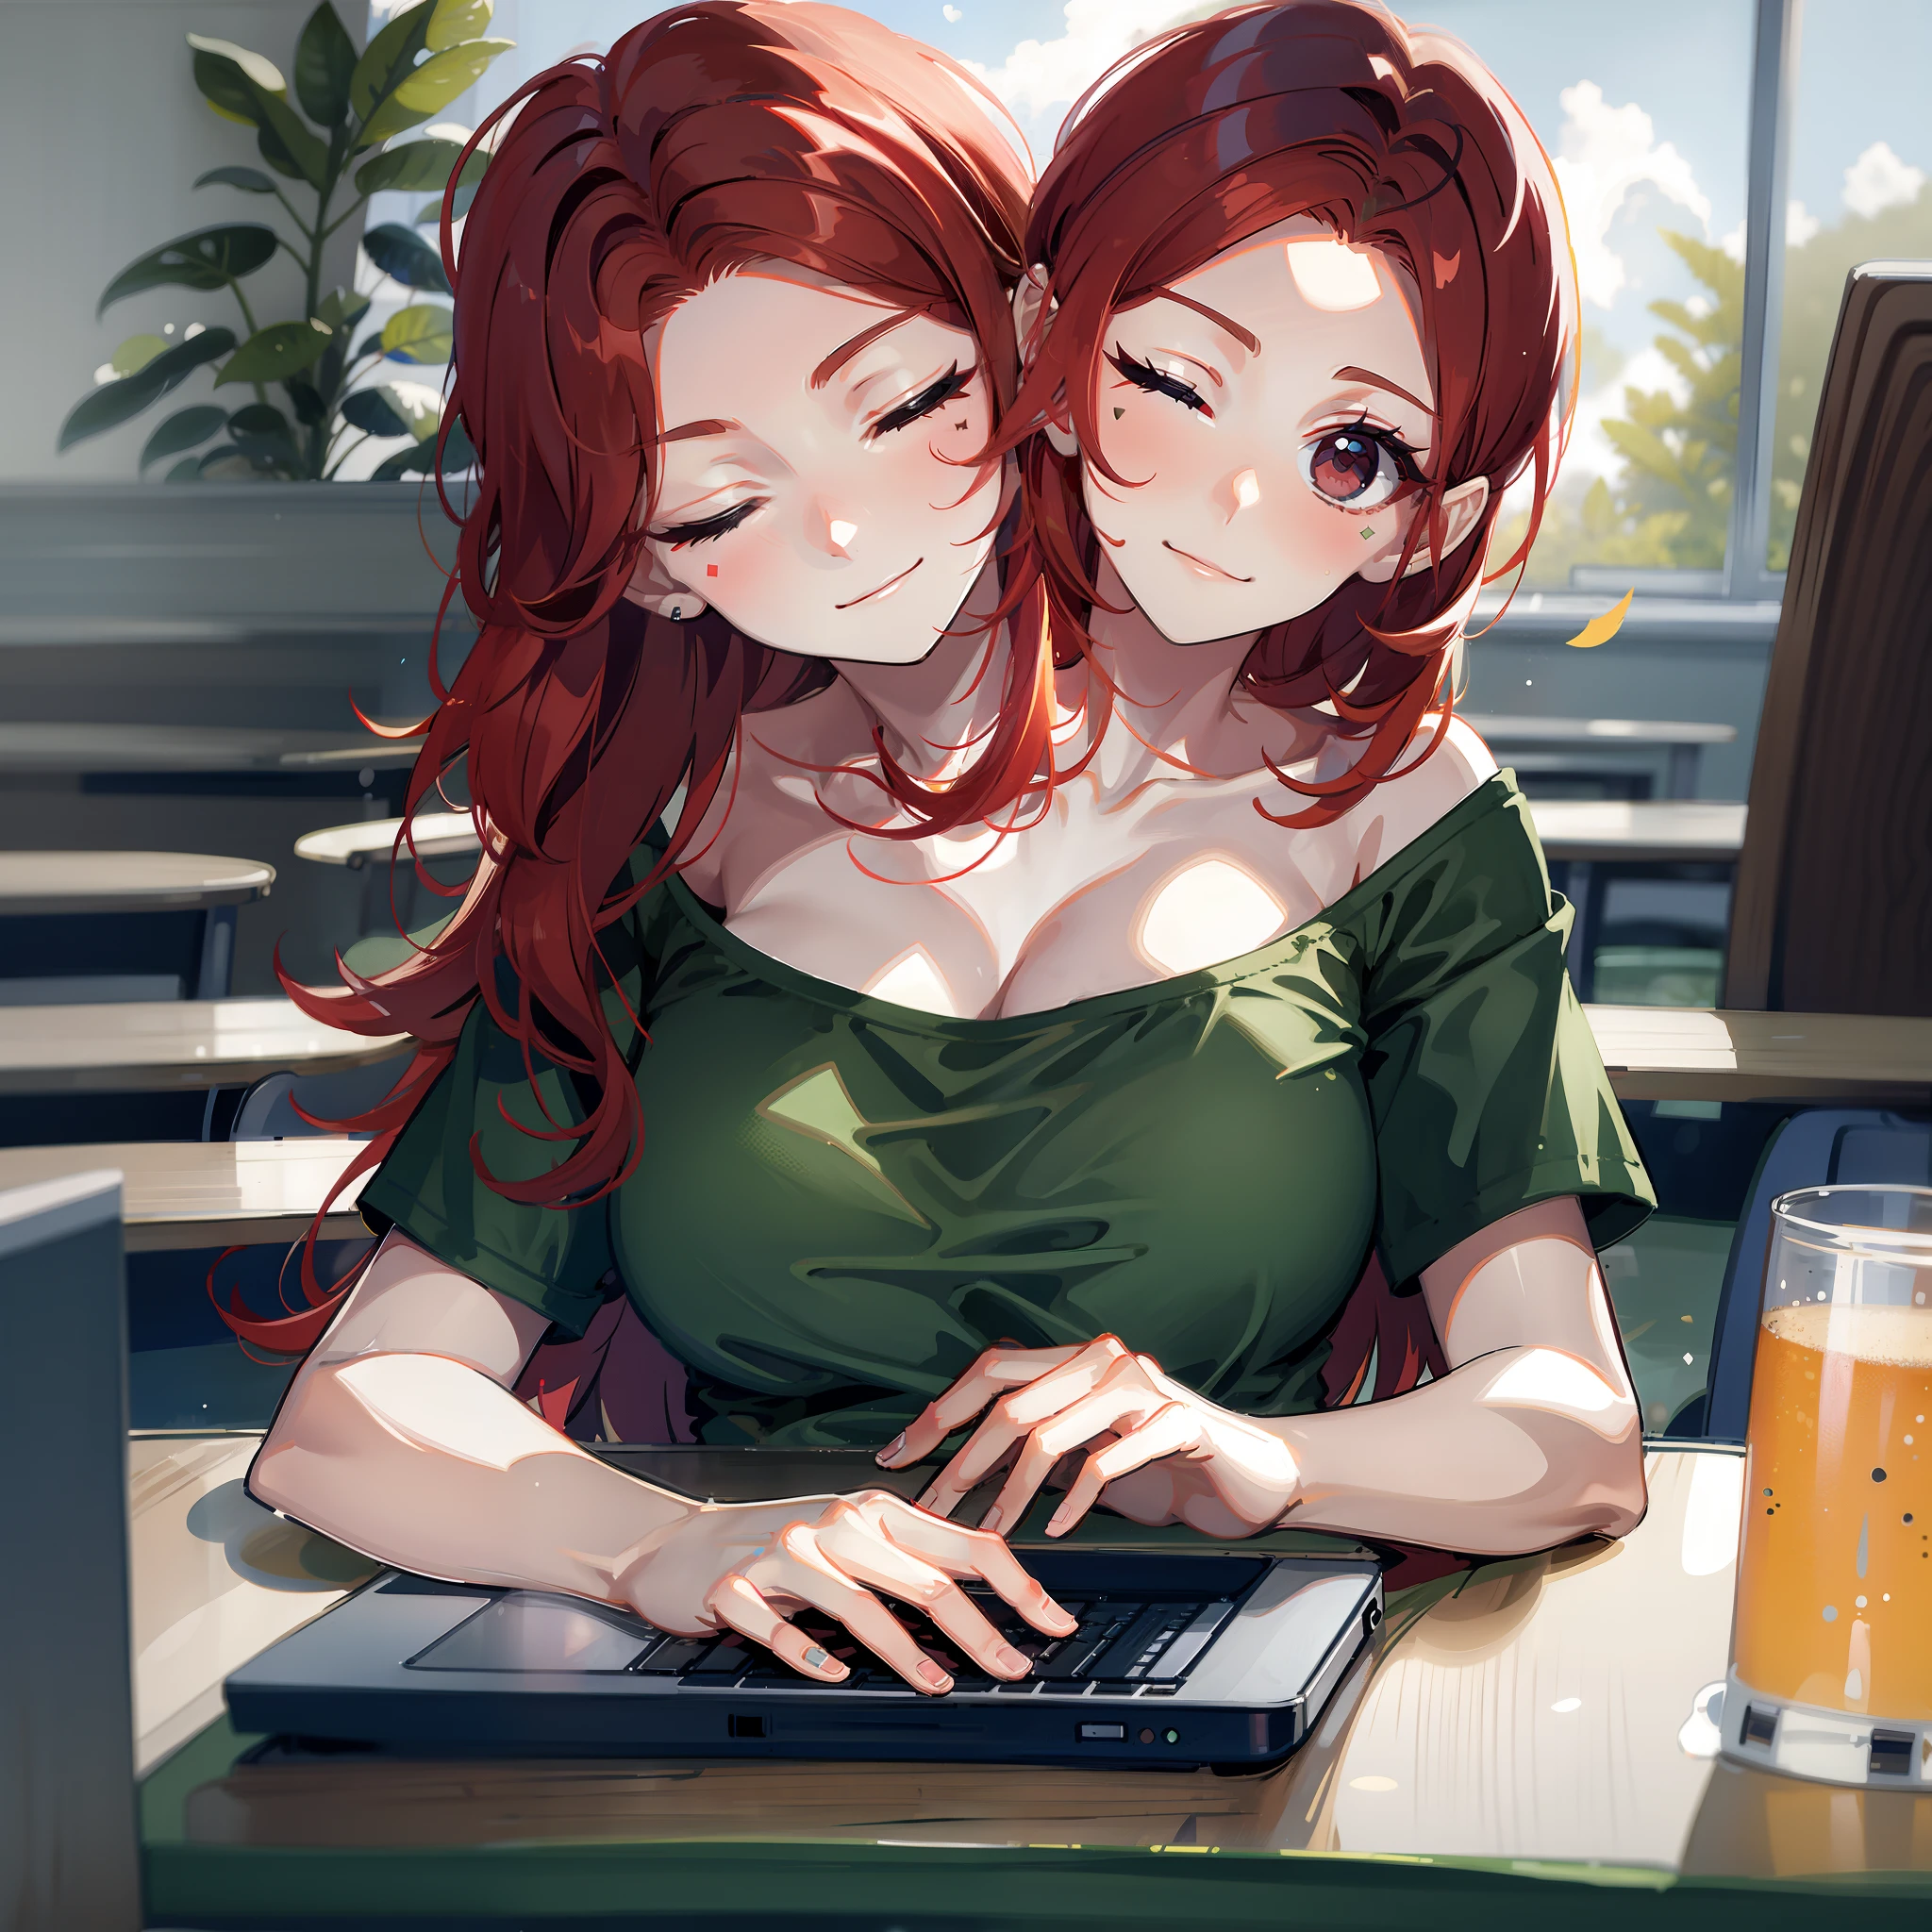 (2heads:1.5), 1girl, red hair, brown eyes, different facial expressions, one eye open, one eye closed, bored, sleepy, tired, green t-shirt, sitting at a table with a laptop, library